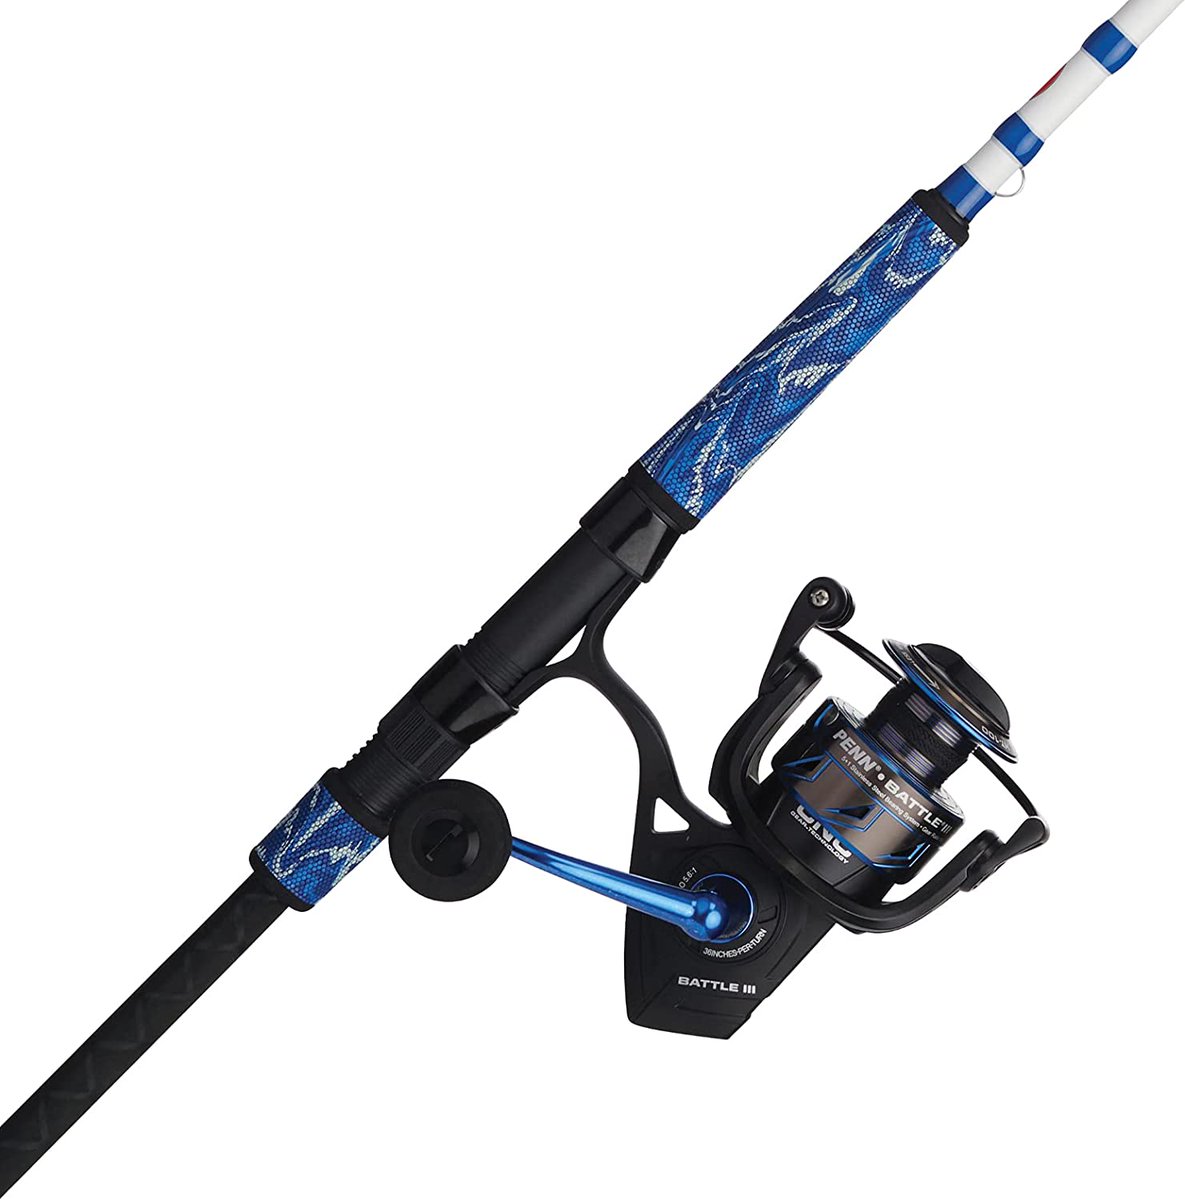 PENN, Plano Fishing Products, and More -- Up to 47% off -- FROM $4.59

amzn.to/3qAwAyw

#fishingproduct #fishingproducts #fishingproductdeals #fishingproductdeal #fishing #fishingdeals #fishingdeal #fishingline #fishingpole #fishingrod #tacklebox #tackle #outdoordeals